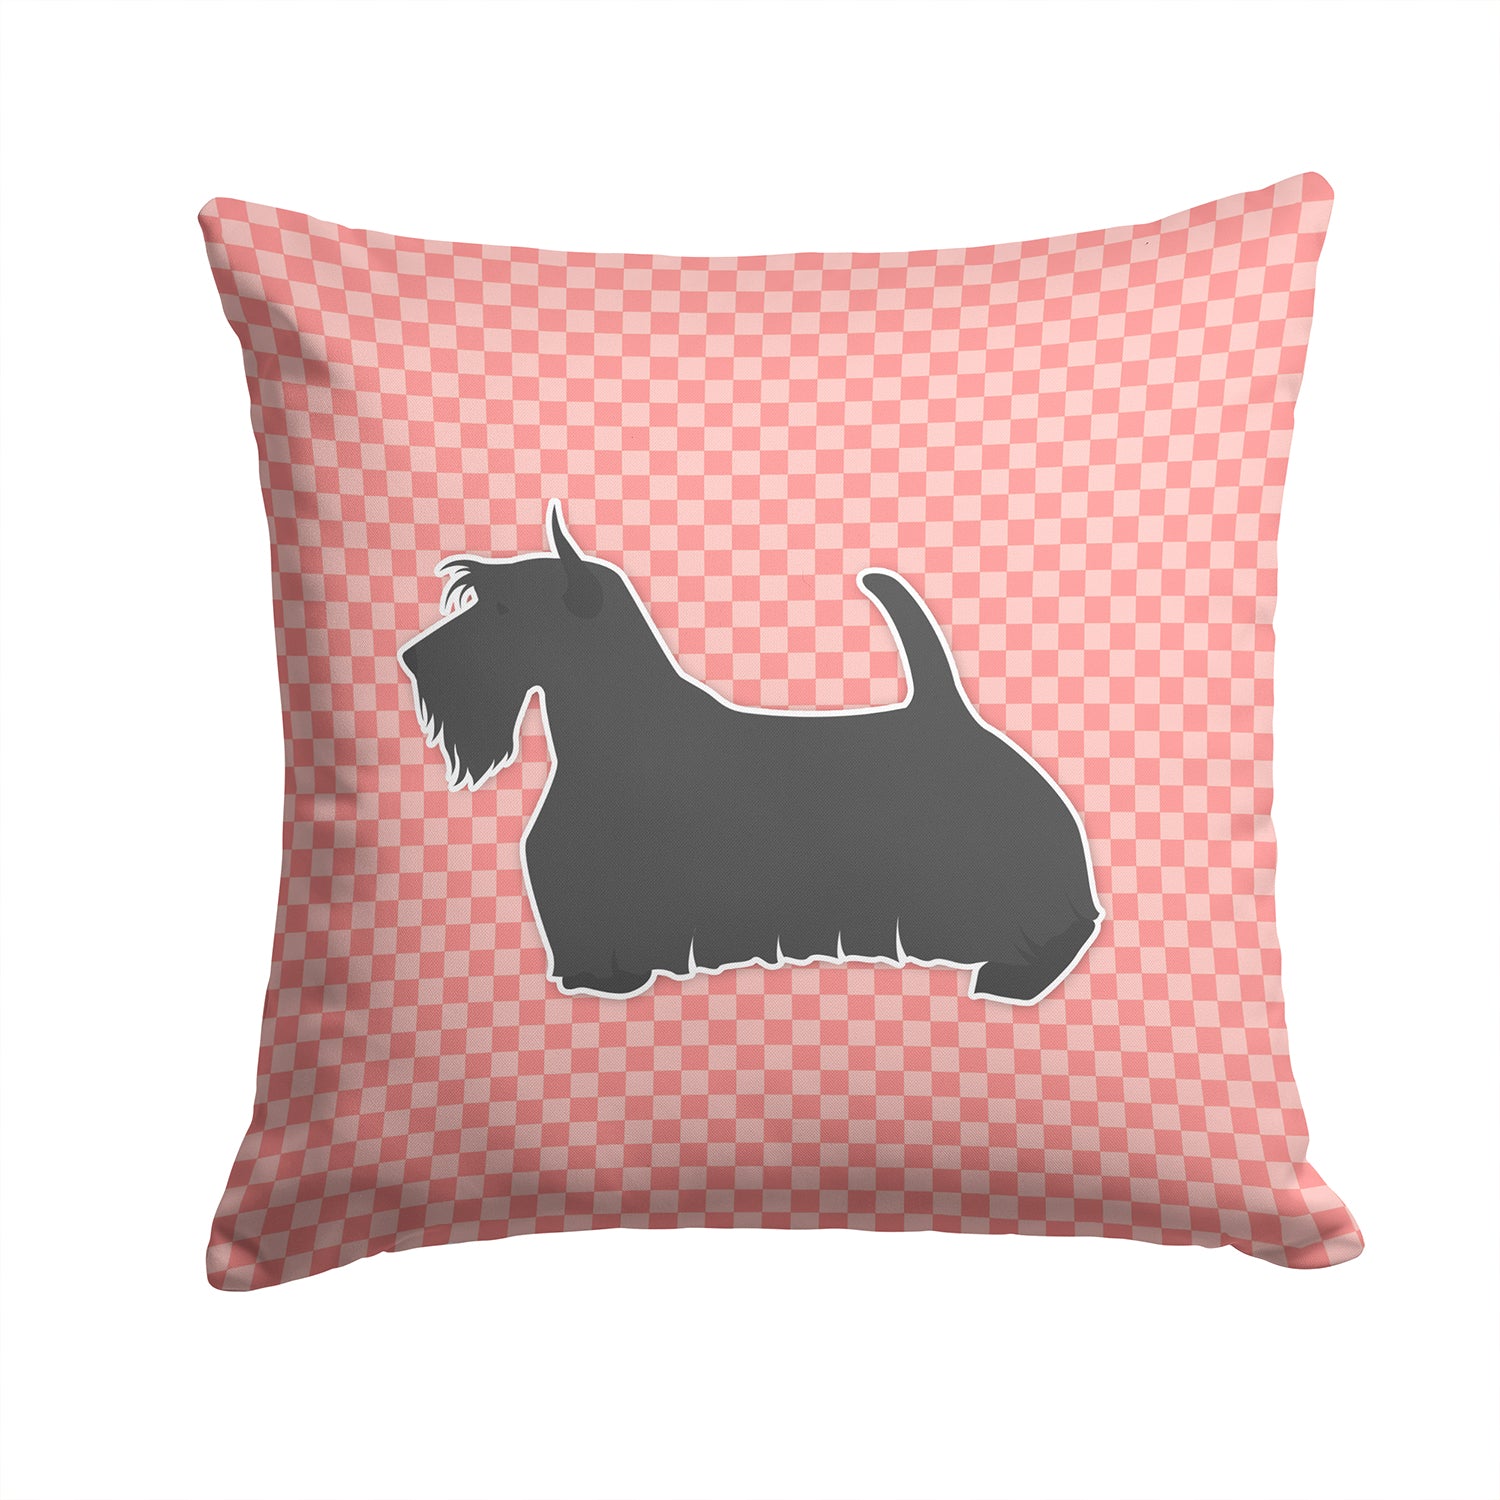 Scottish Terrier Checkerboard Pink Fabric Decorative Pillow BB3669PW1414 - the-store.com